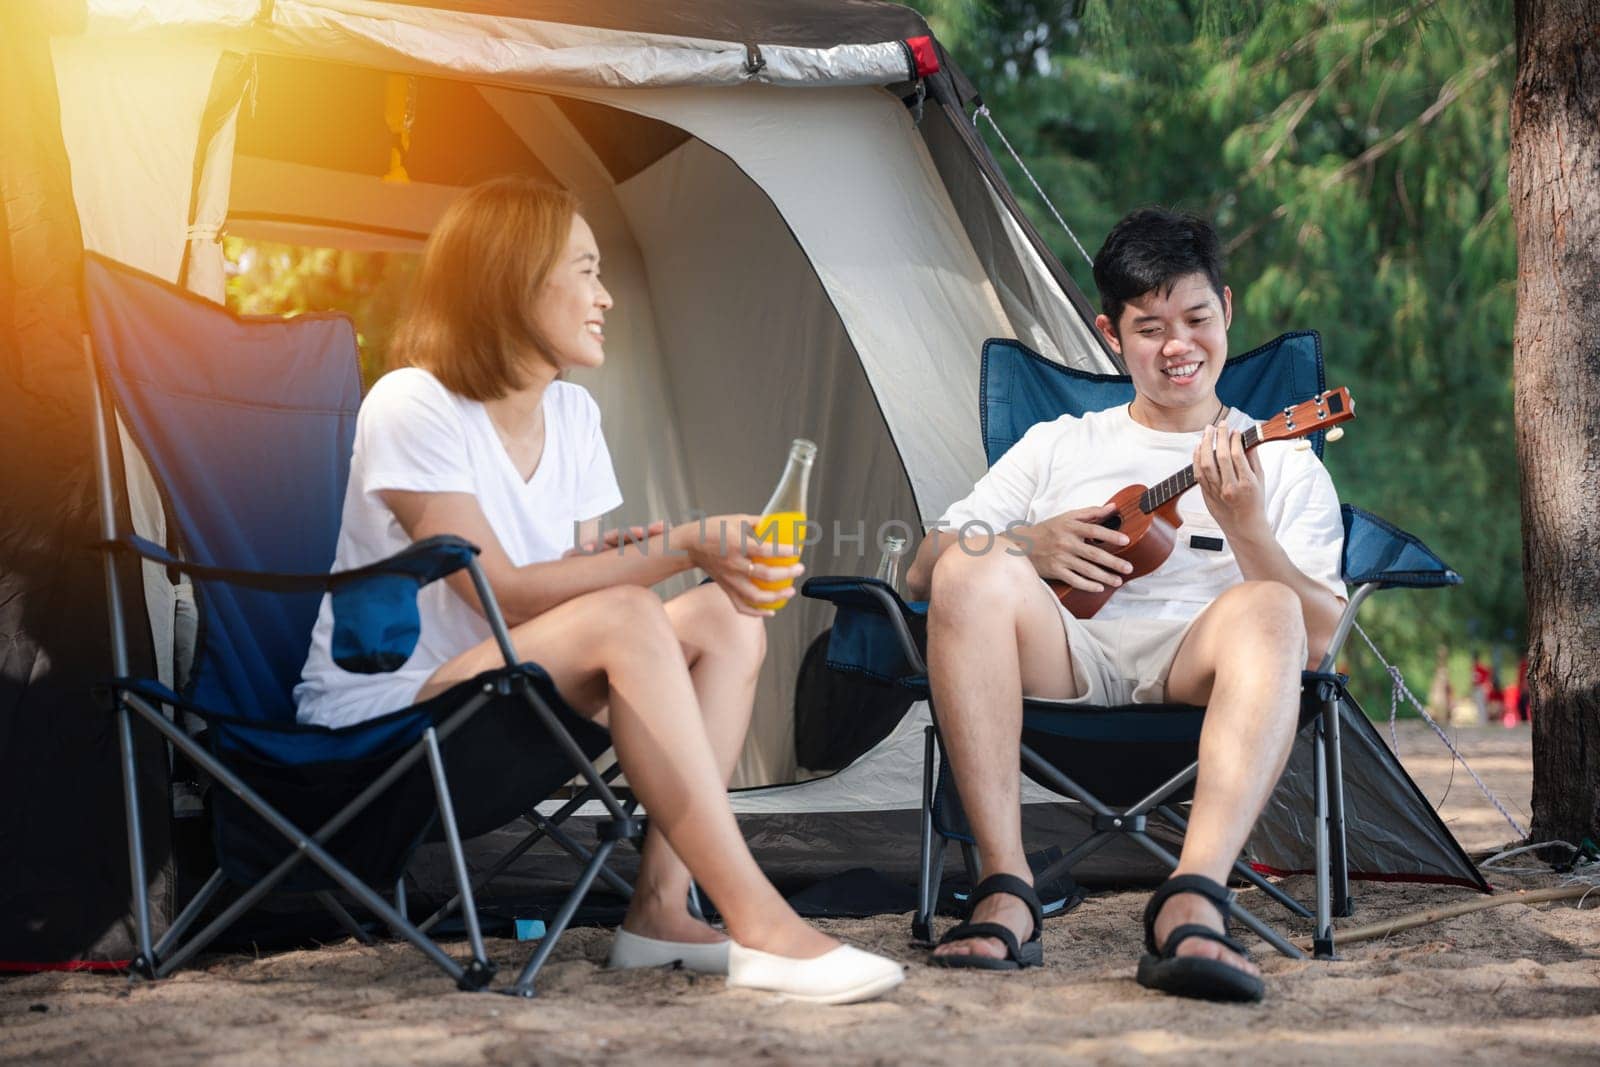 An outdoor serenade, A beaming Asian couple, by their tent, shares a song on the ukulele, capturing the essence of togetherness and happiness. Music and love unite at the campsite. Camping putdoor